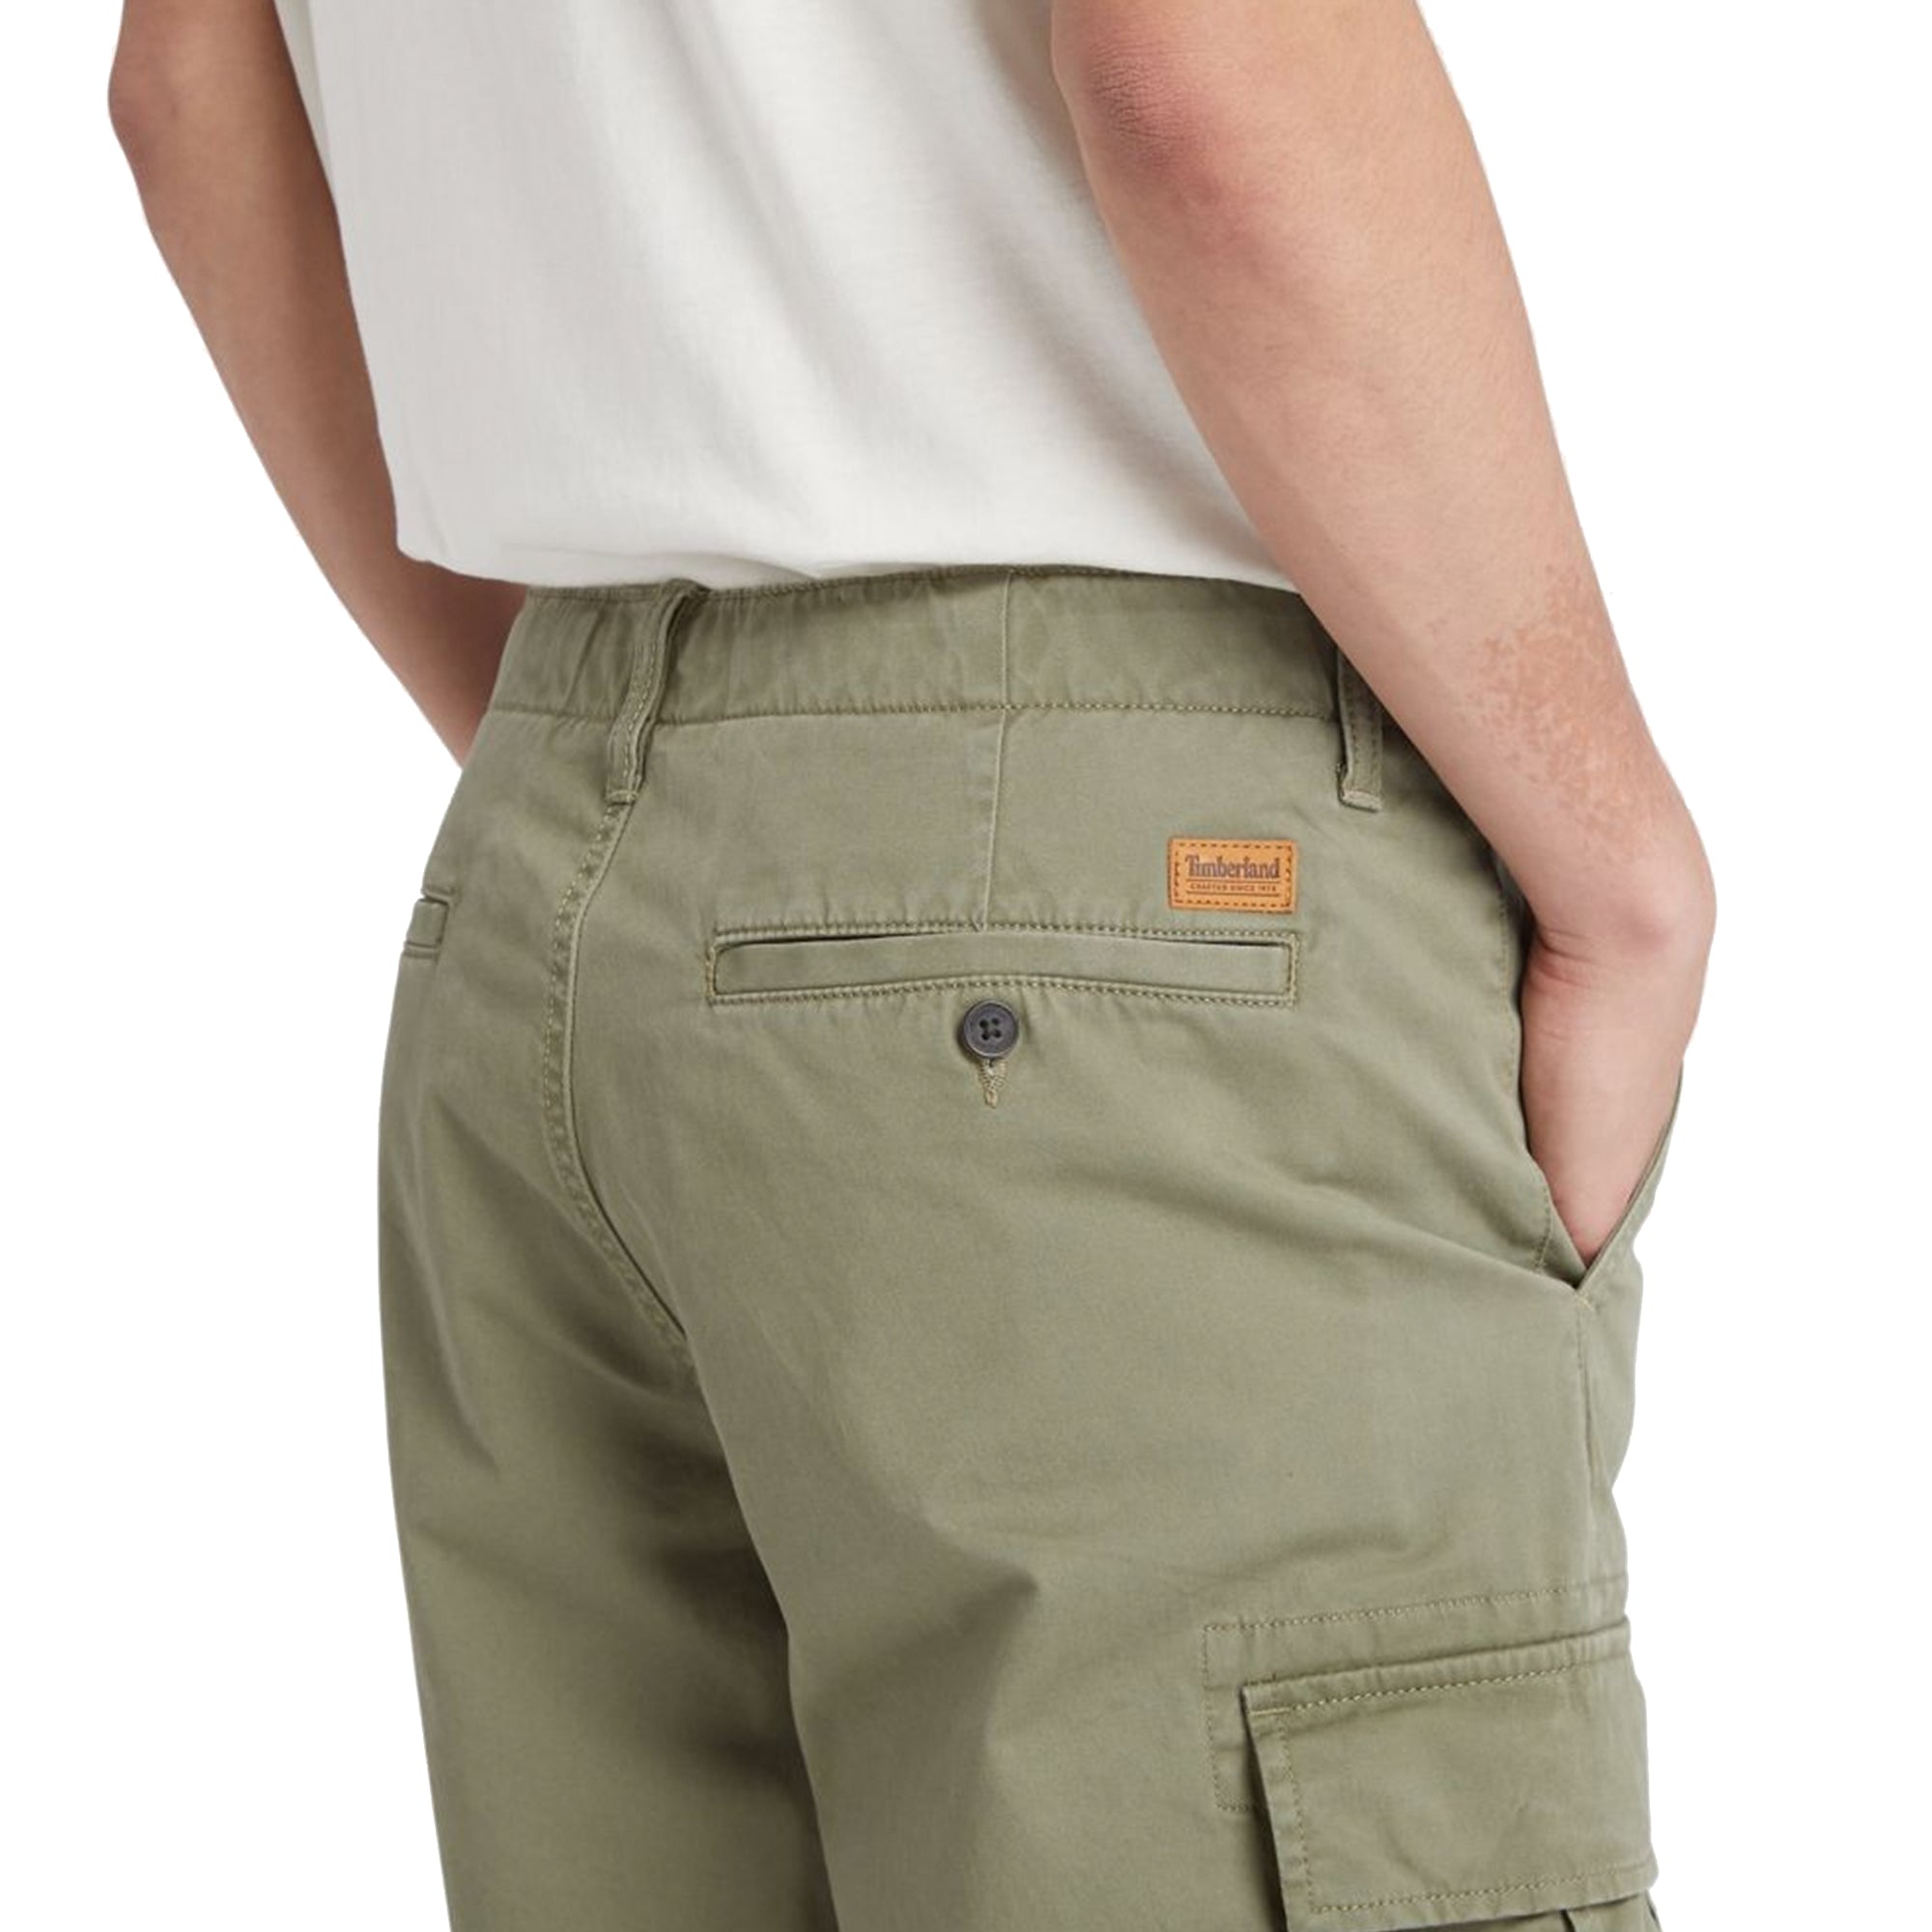 Buy Timberland Men's Twill Cargo Pant,Cleveland,42x34 at Amazon.in